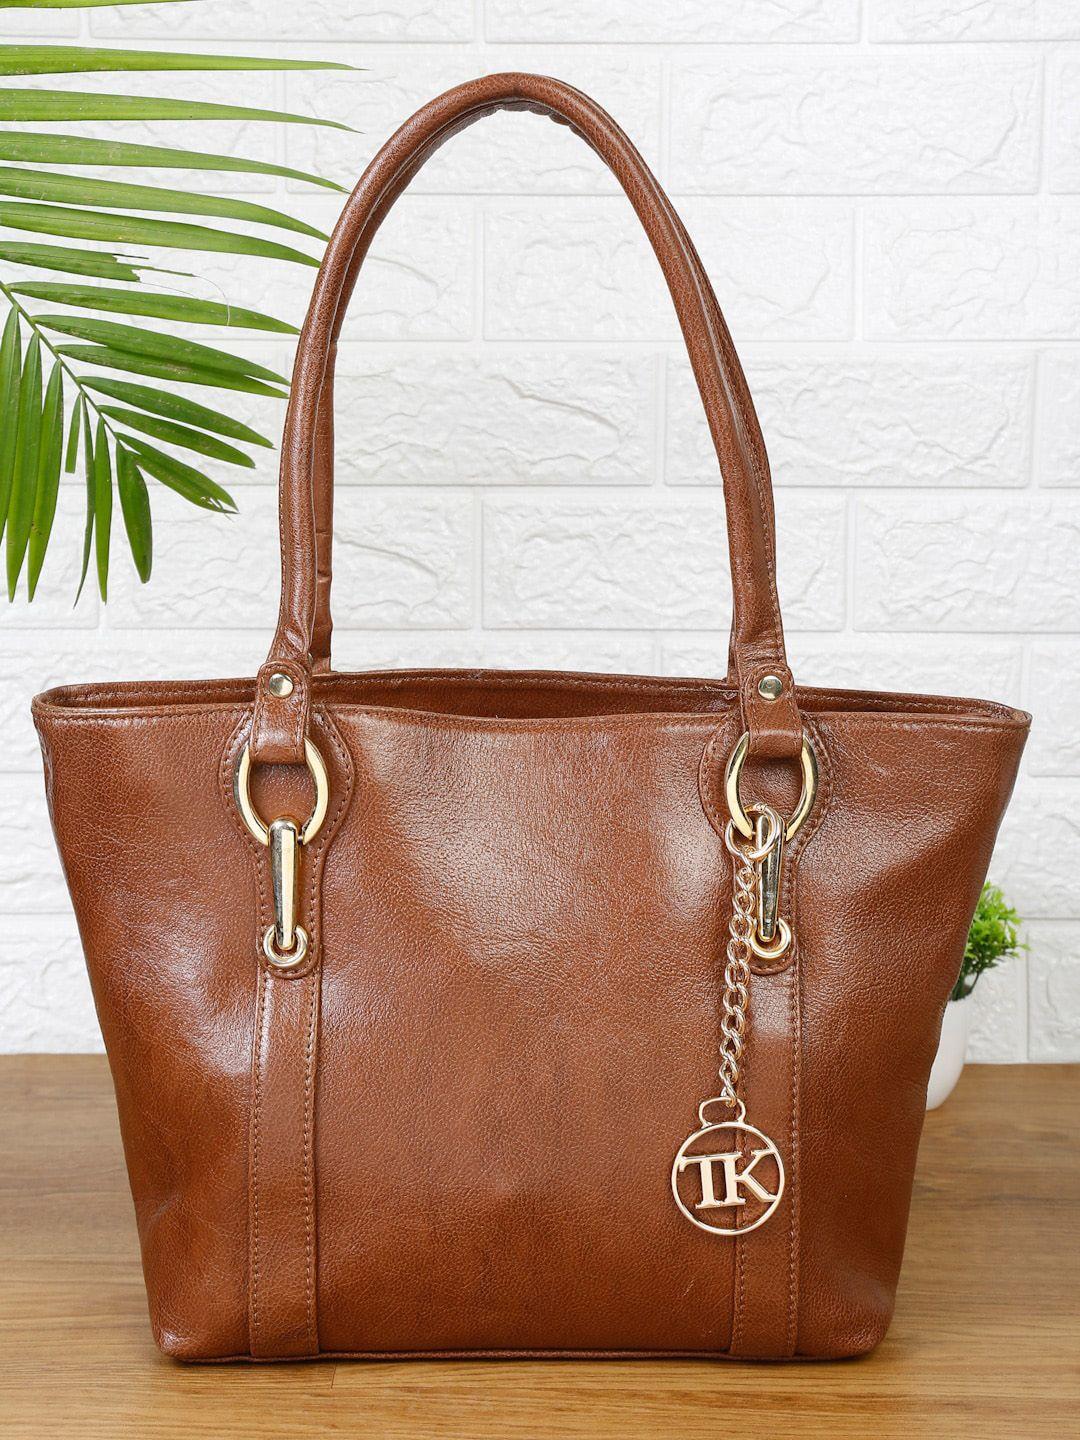 teakwood leathers brown leather oversized structured handheld bag